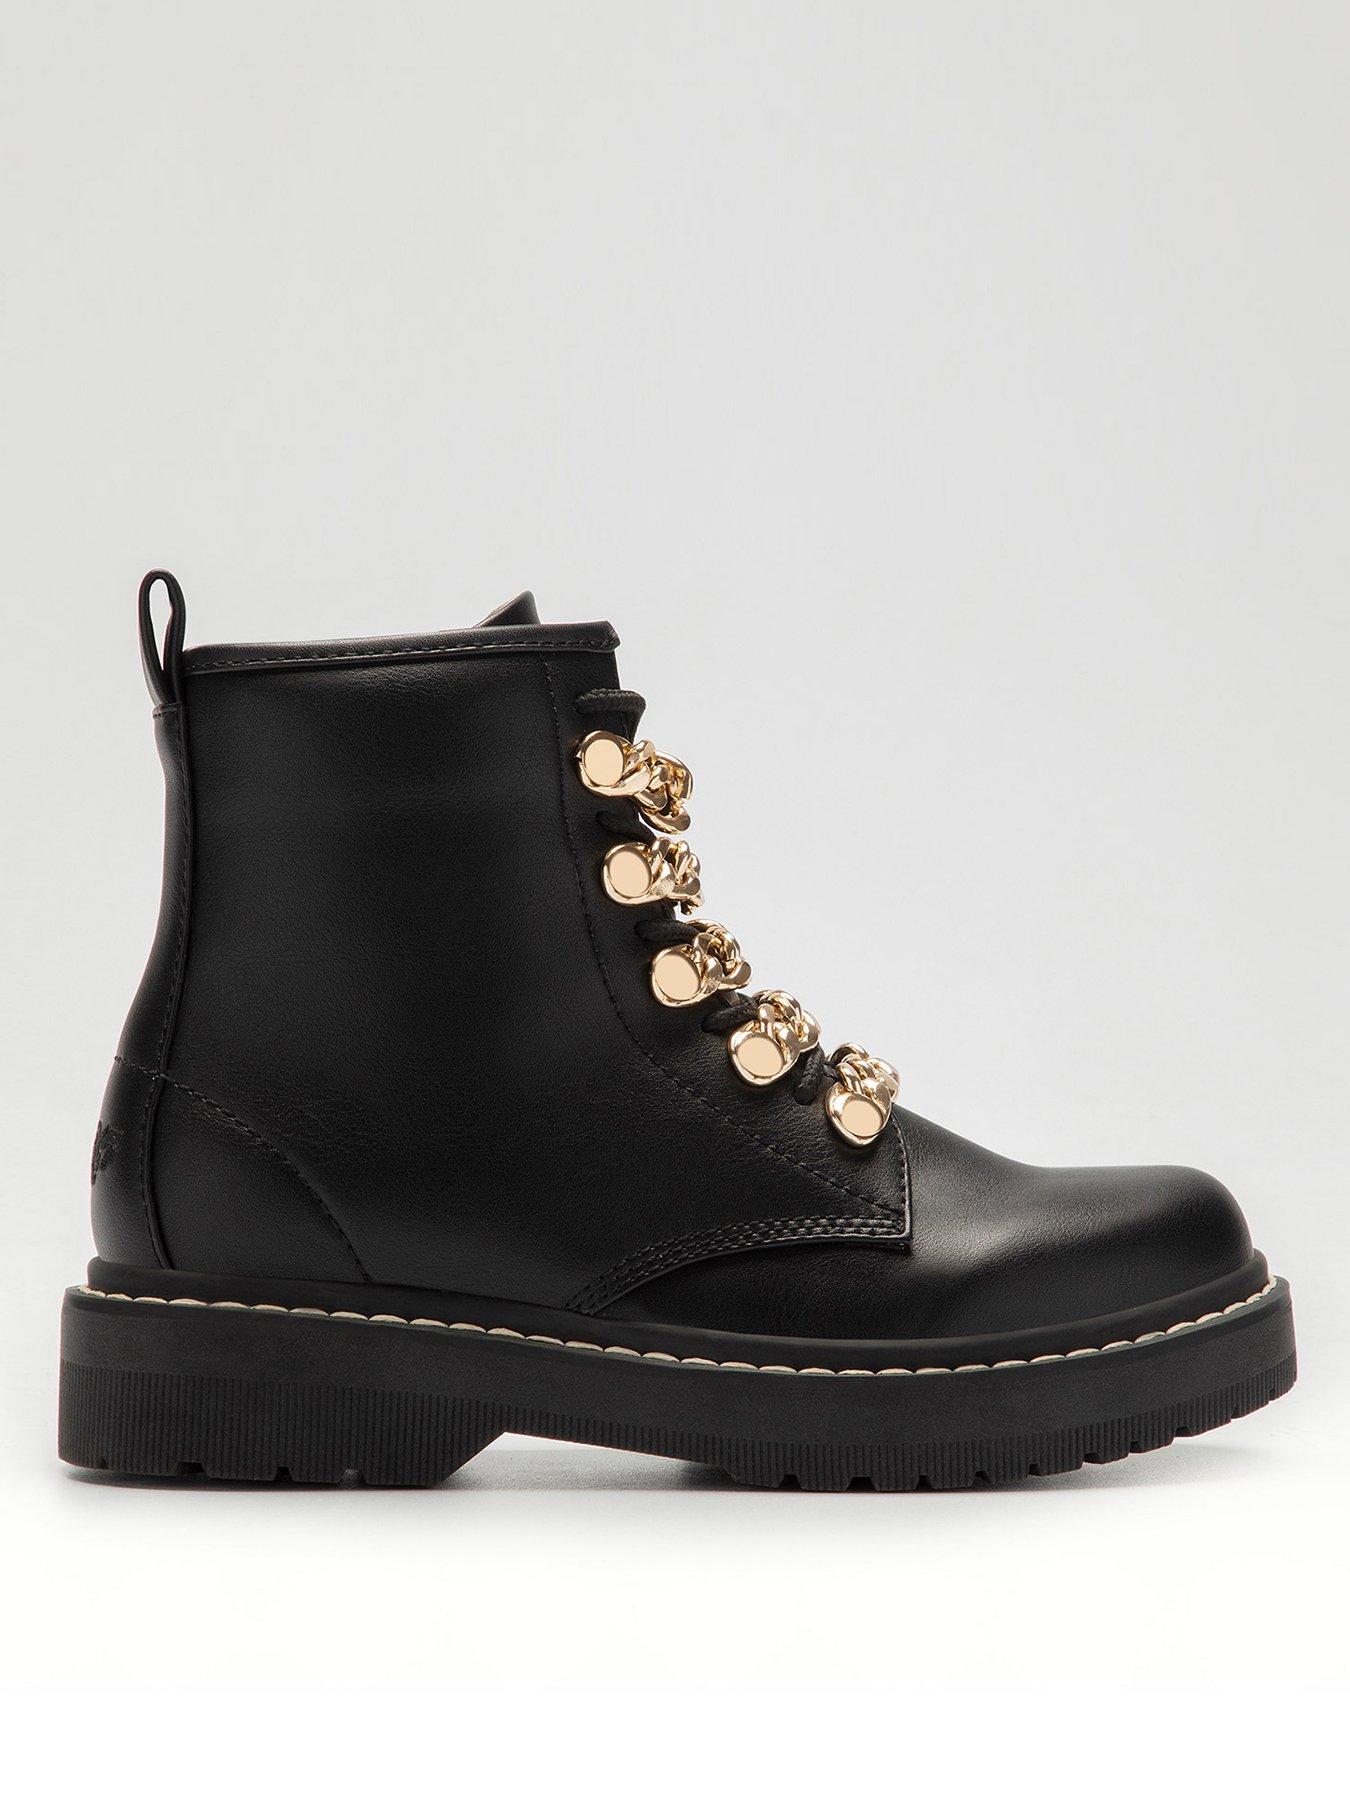 Shoes & boots Corinna Chain Boots